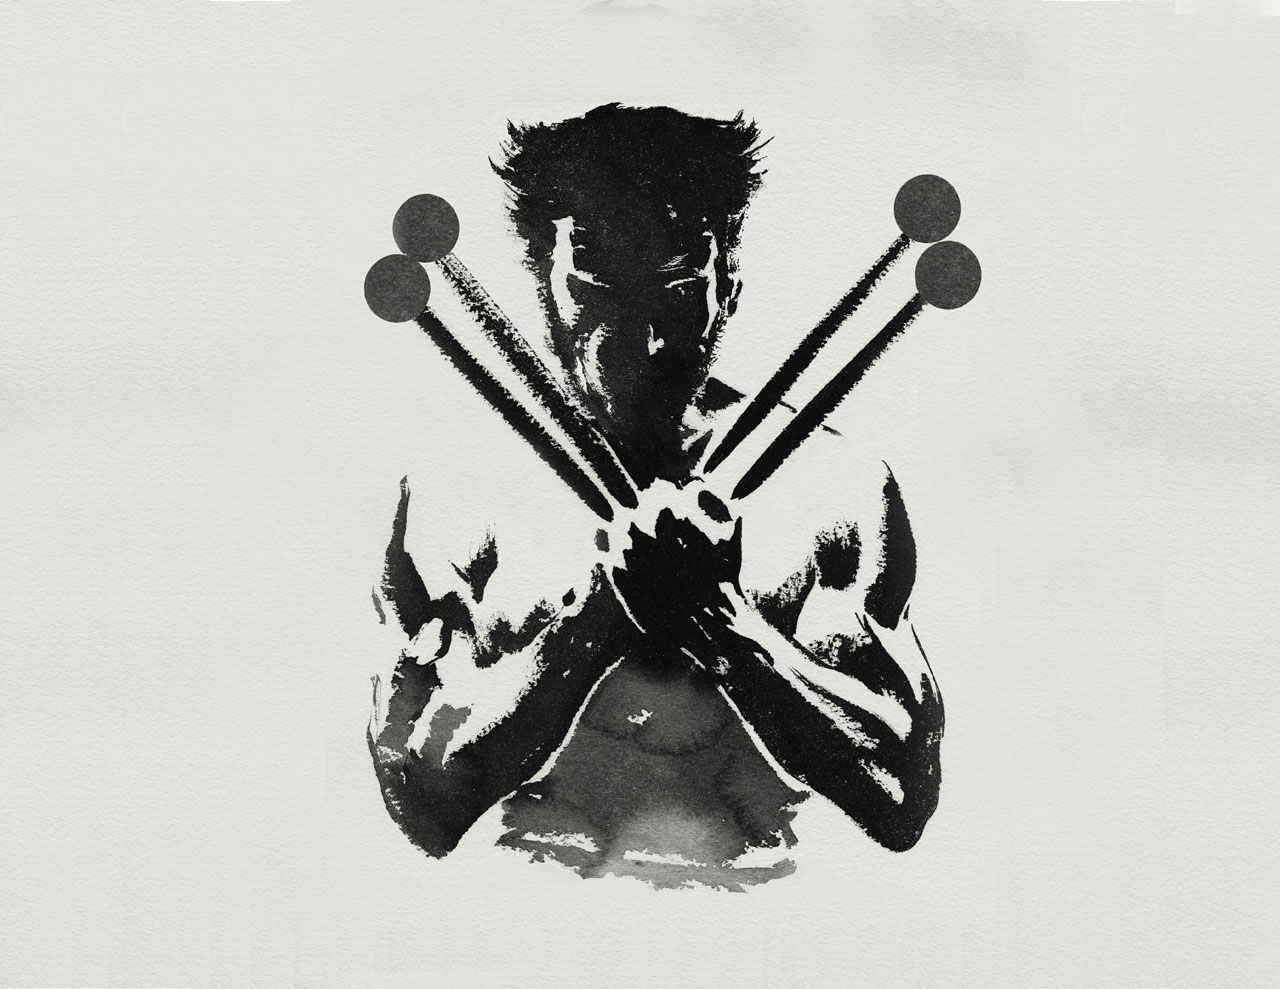 graphic image of drummer with cross drum sticks